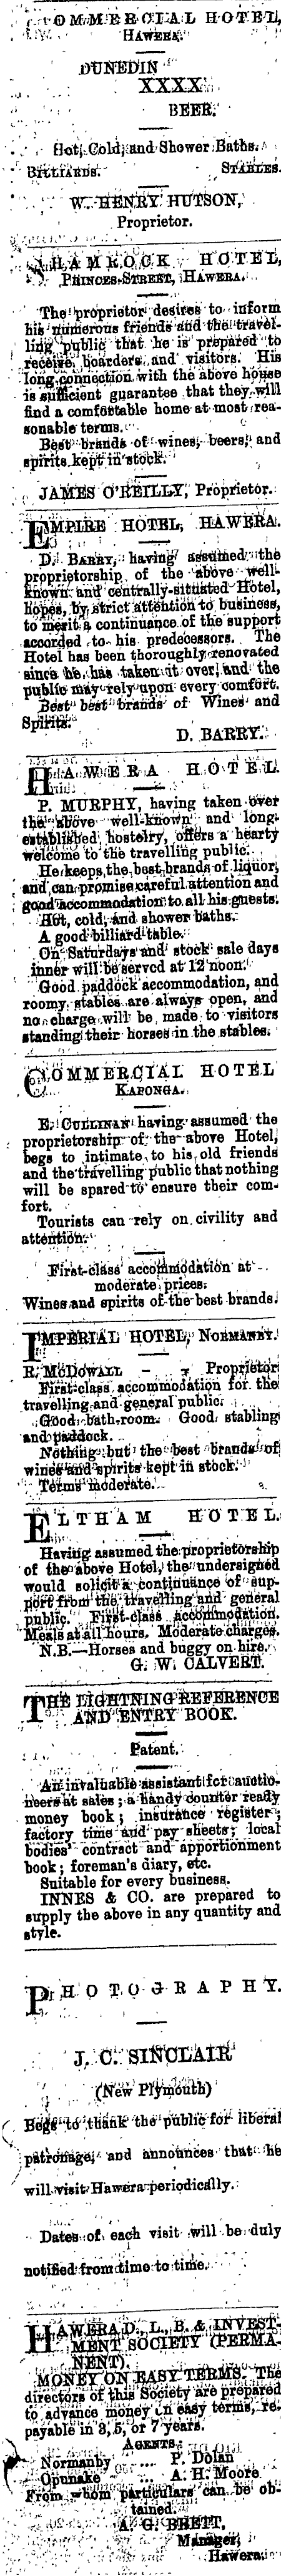 Papers Past Newspapers Hawera Normanby Star 21 March 1892 Page 1 Advertisements Column 1